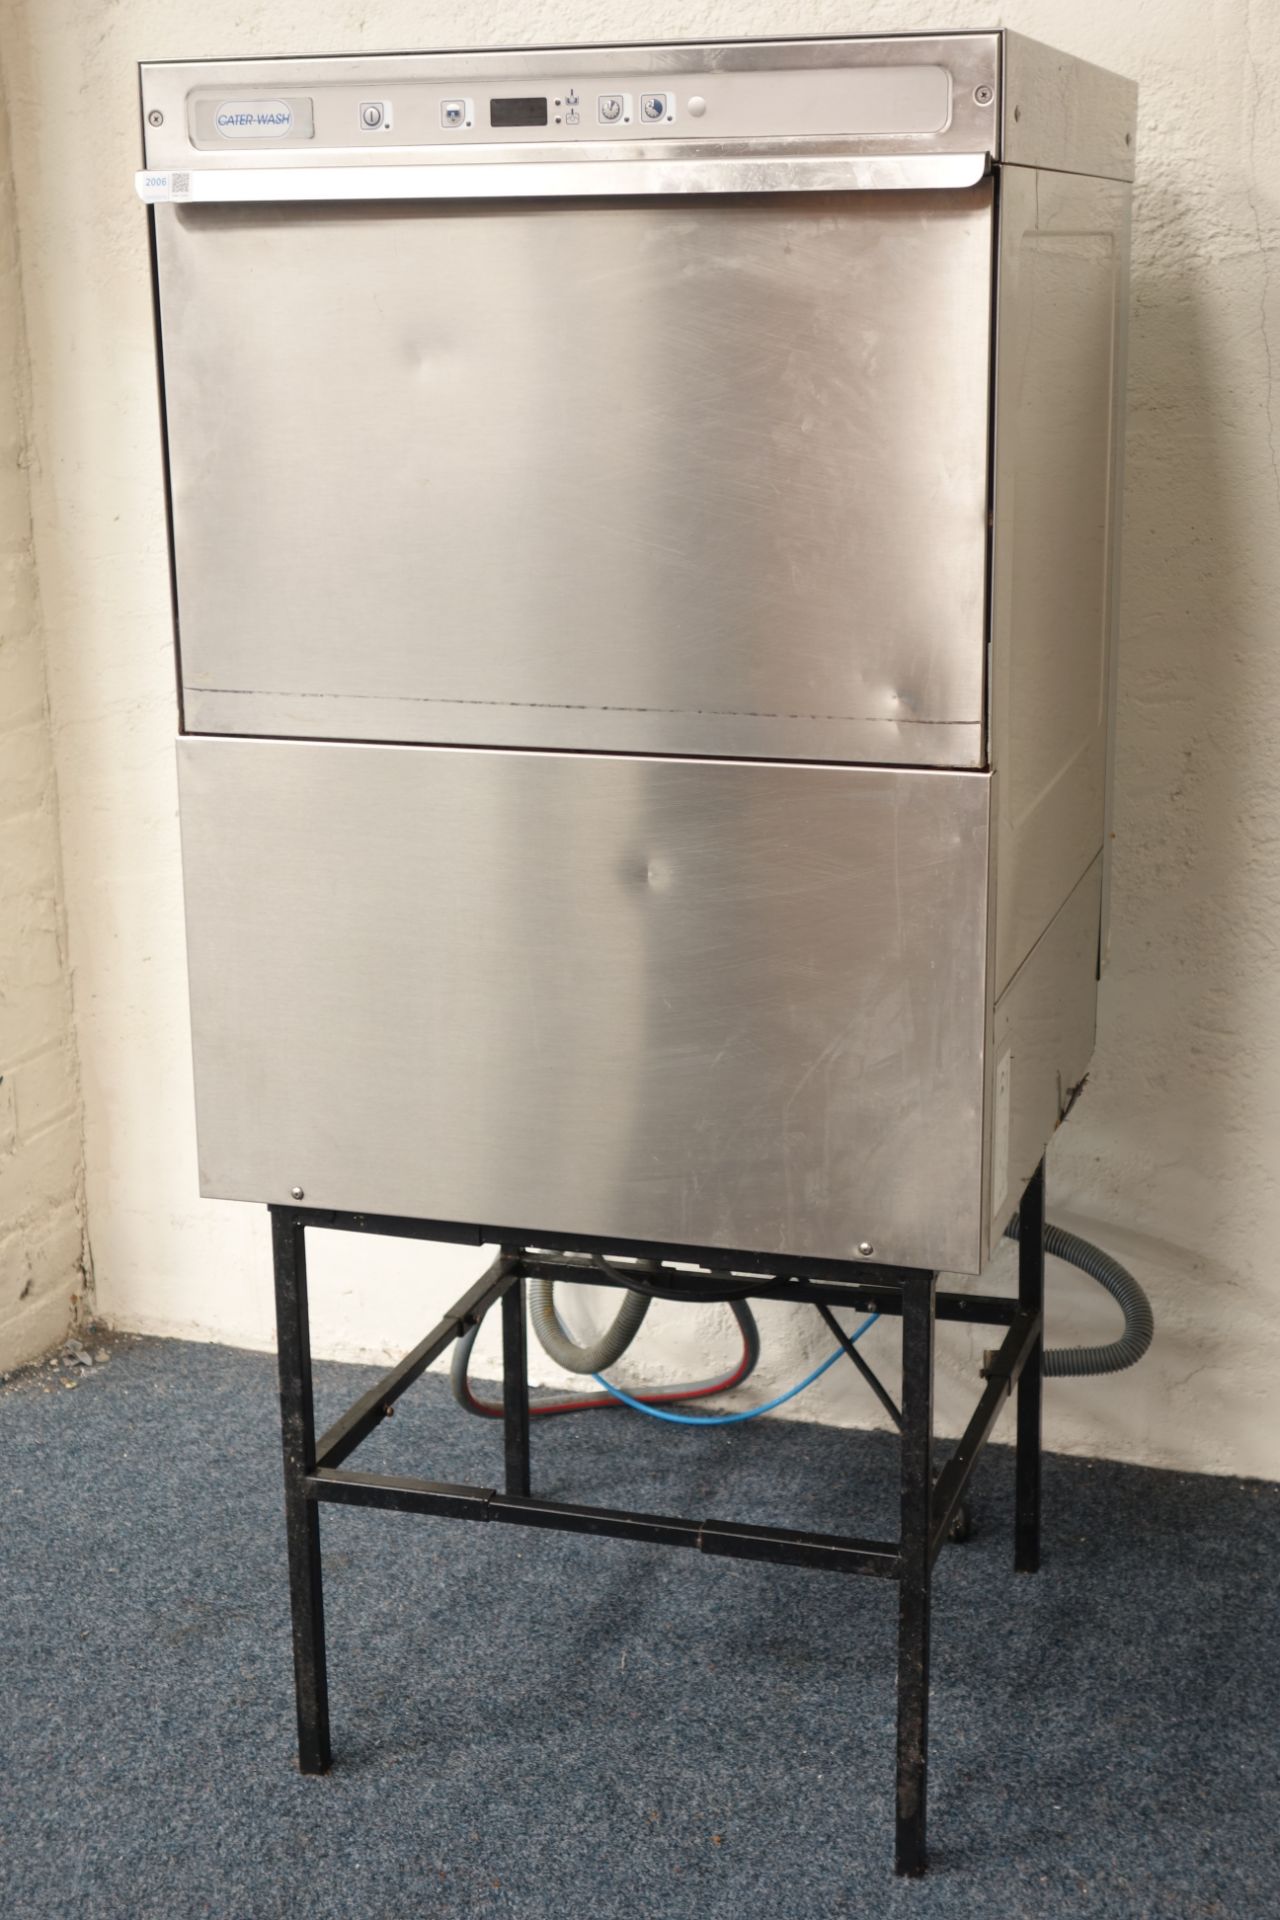 Cater-Wash commercial dishwasher on stand,